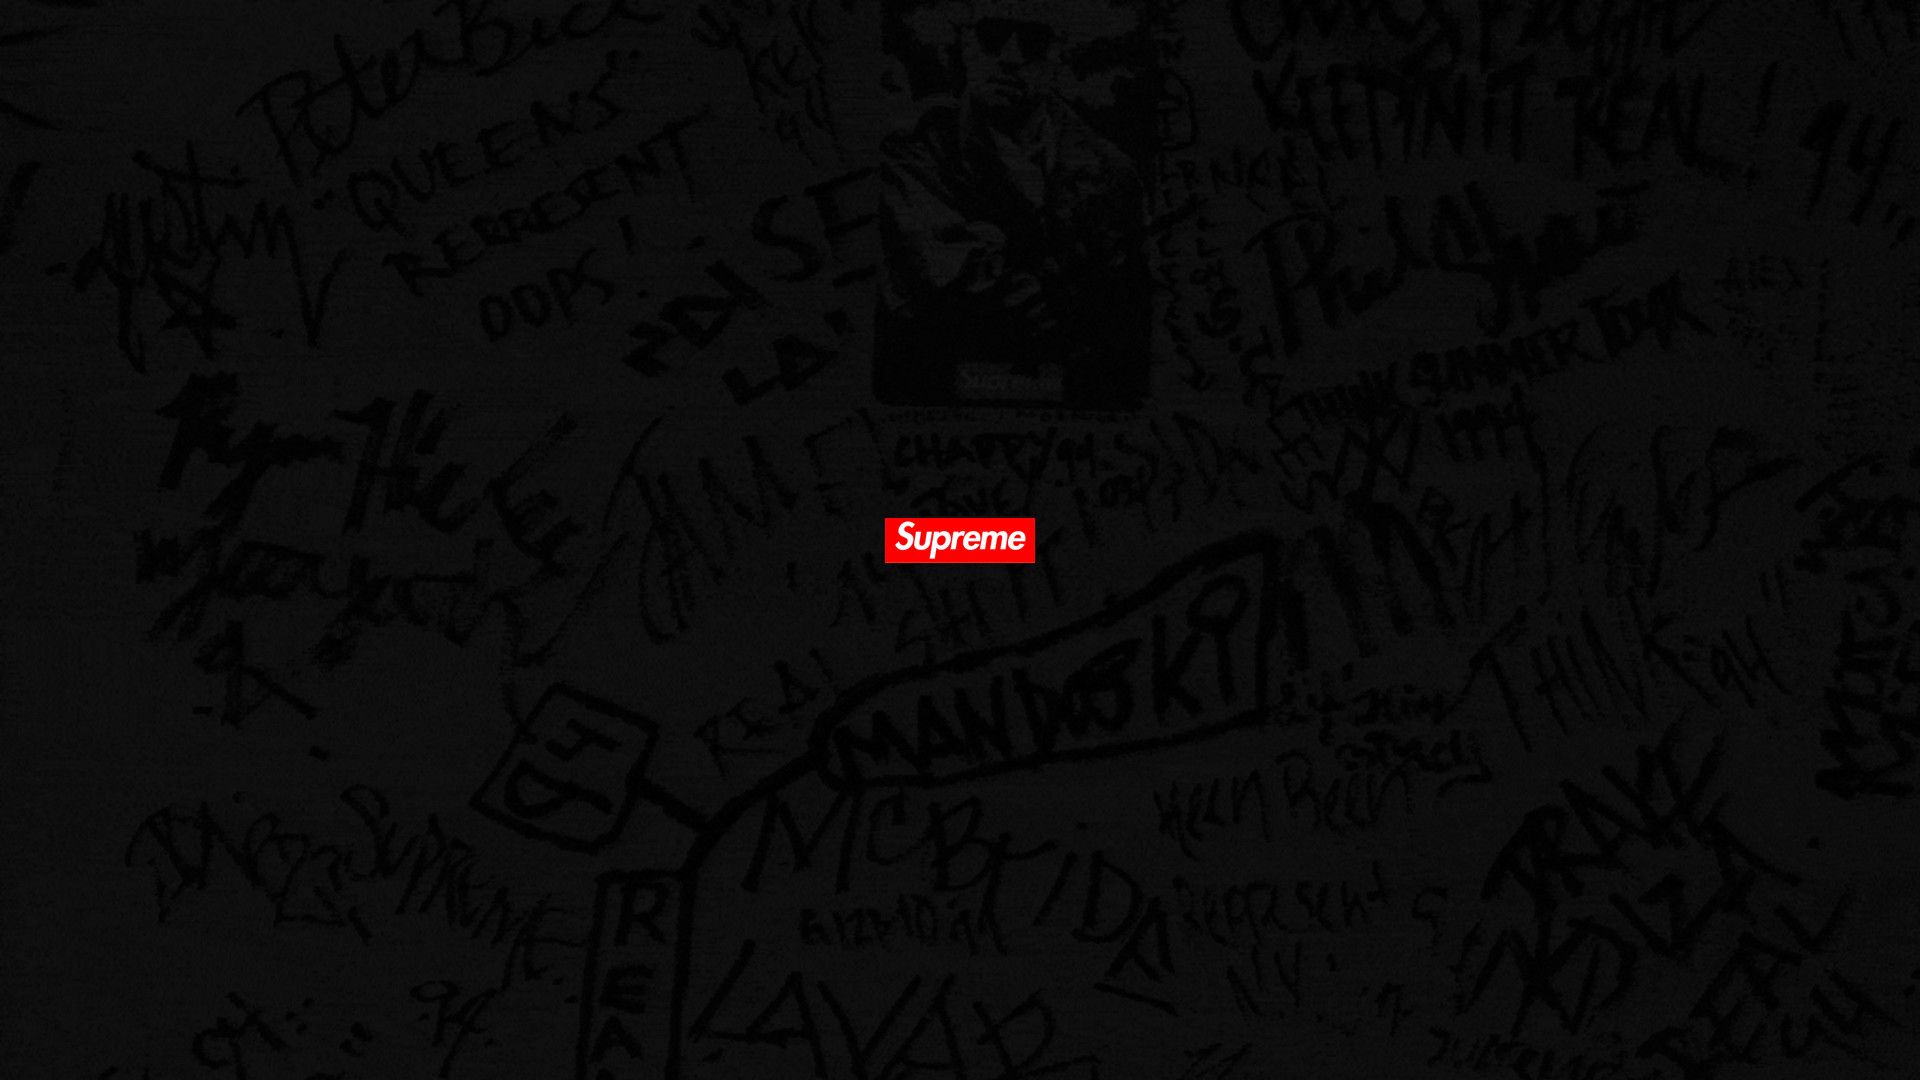 Gucci Wallpaper Discover more Apple Background Iphone Louis Vuitton Supreme  wallpaper  Iphone wallpaper fashion Jordan logo wallpaper Gucci  wallpaper iphone